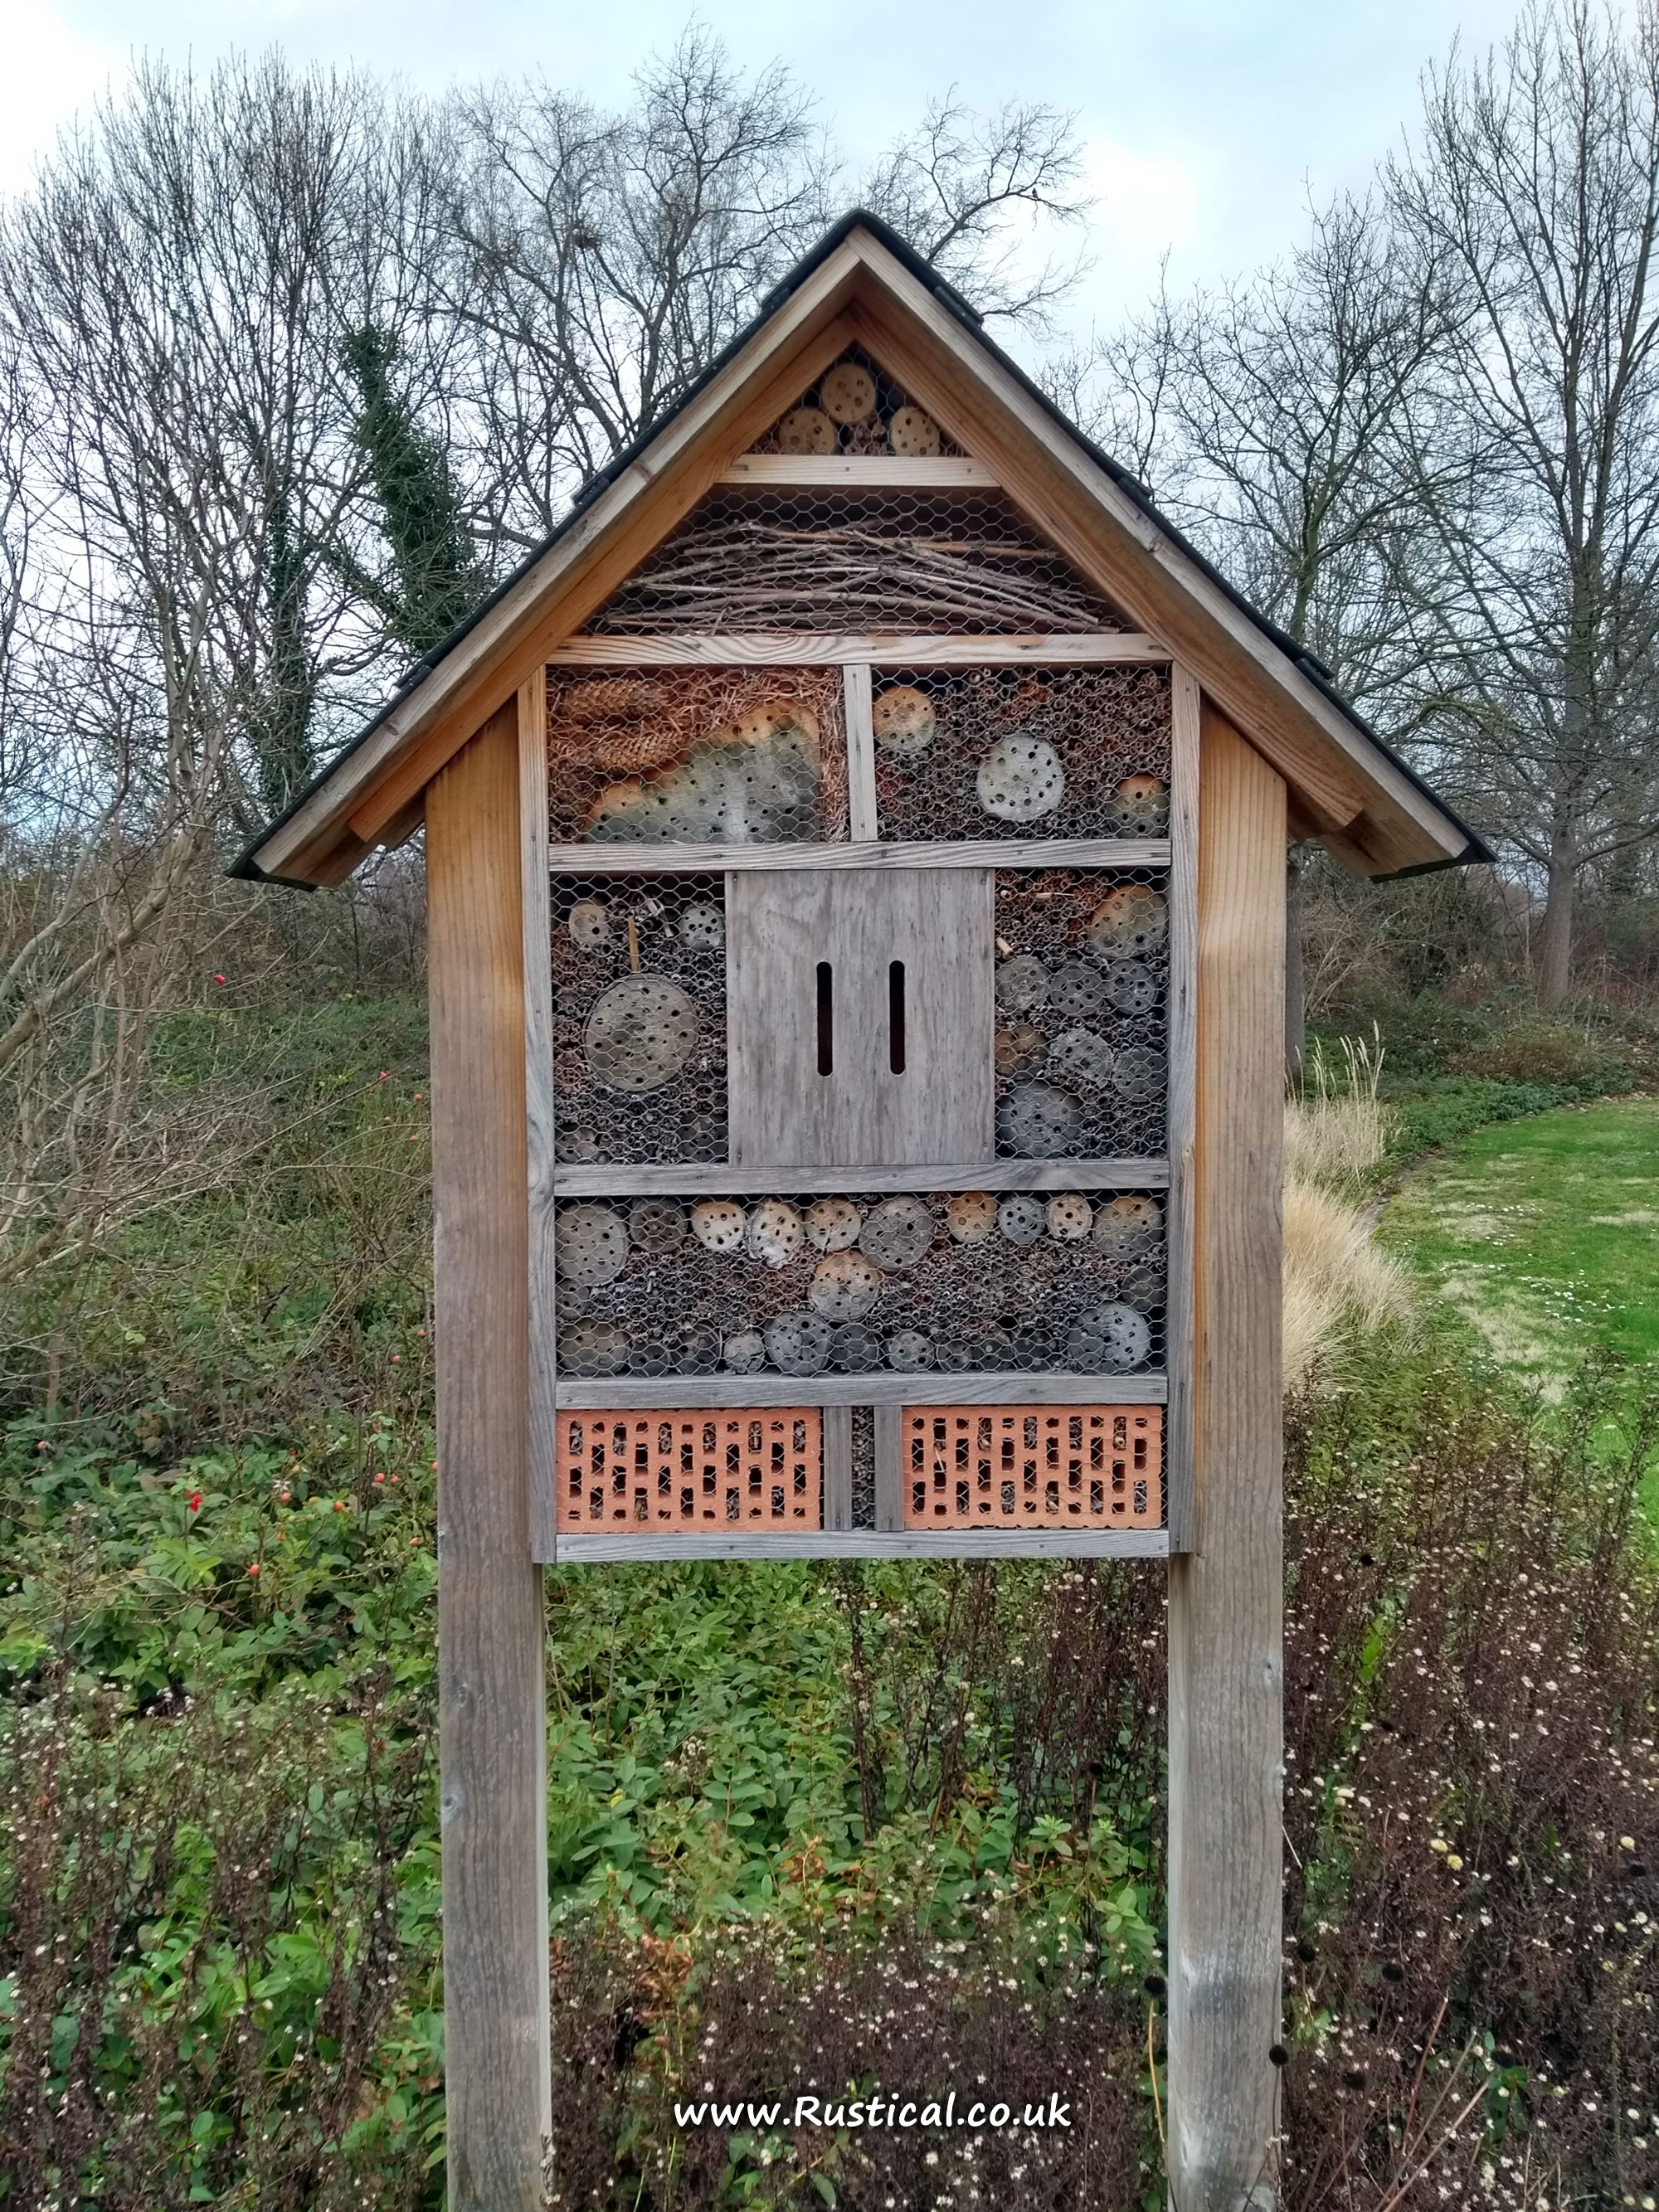 The Bug Hotel at BASF Rehhutte